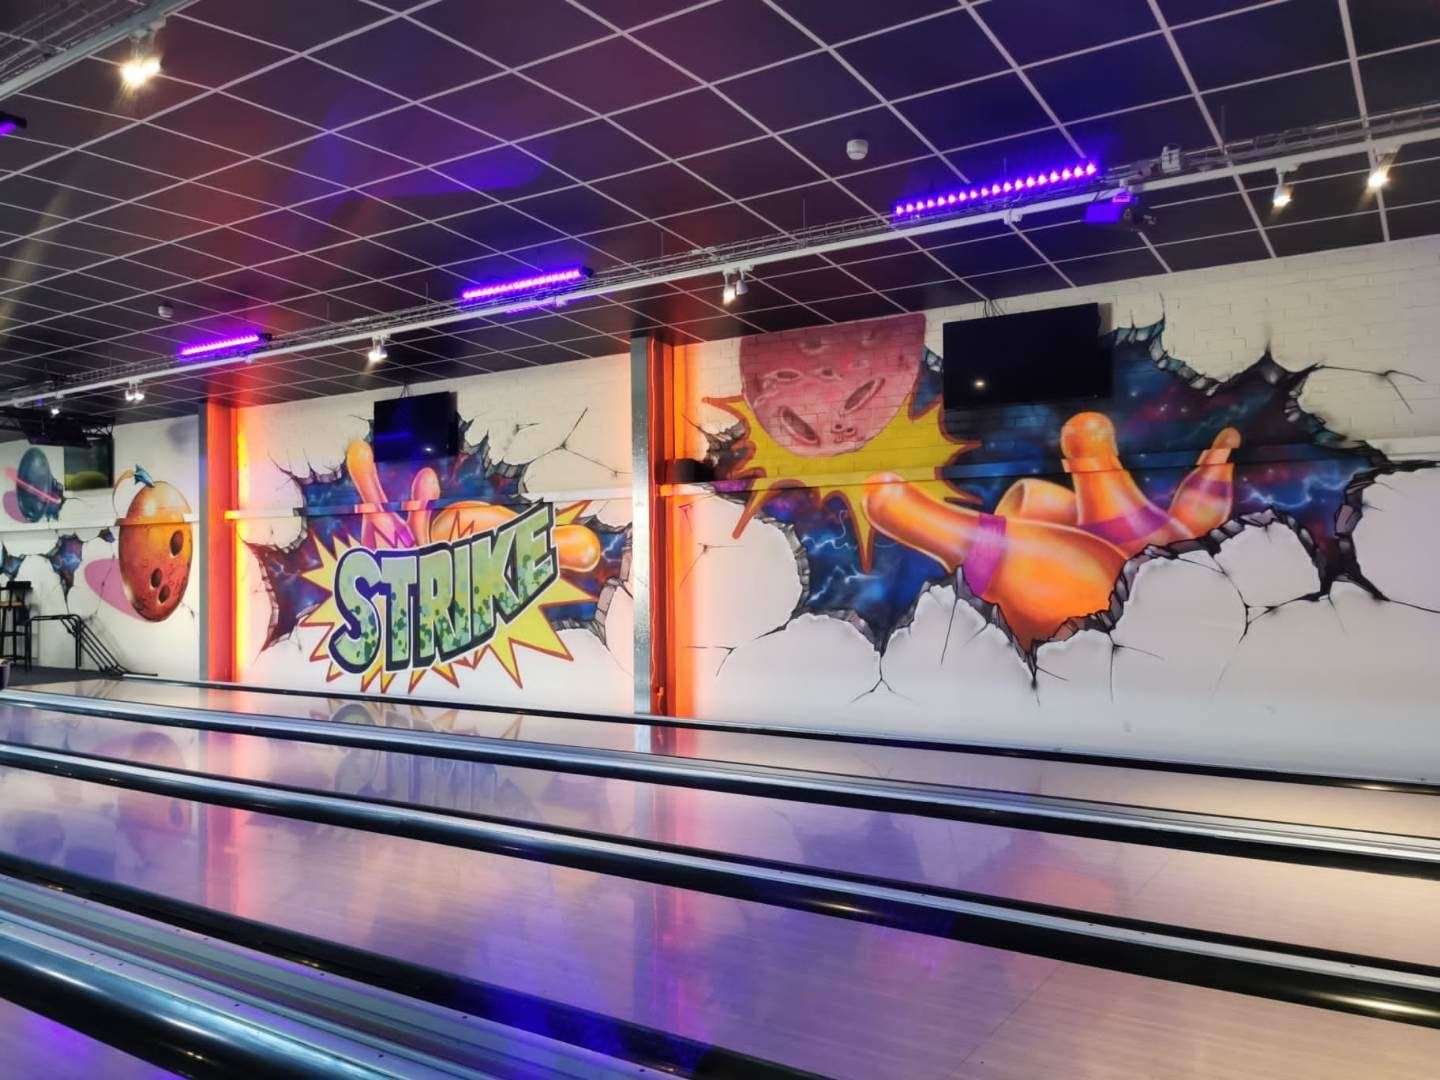 The city's only bowling centre will be relaunching this weekend